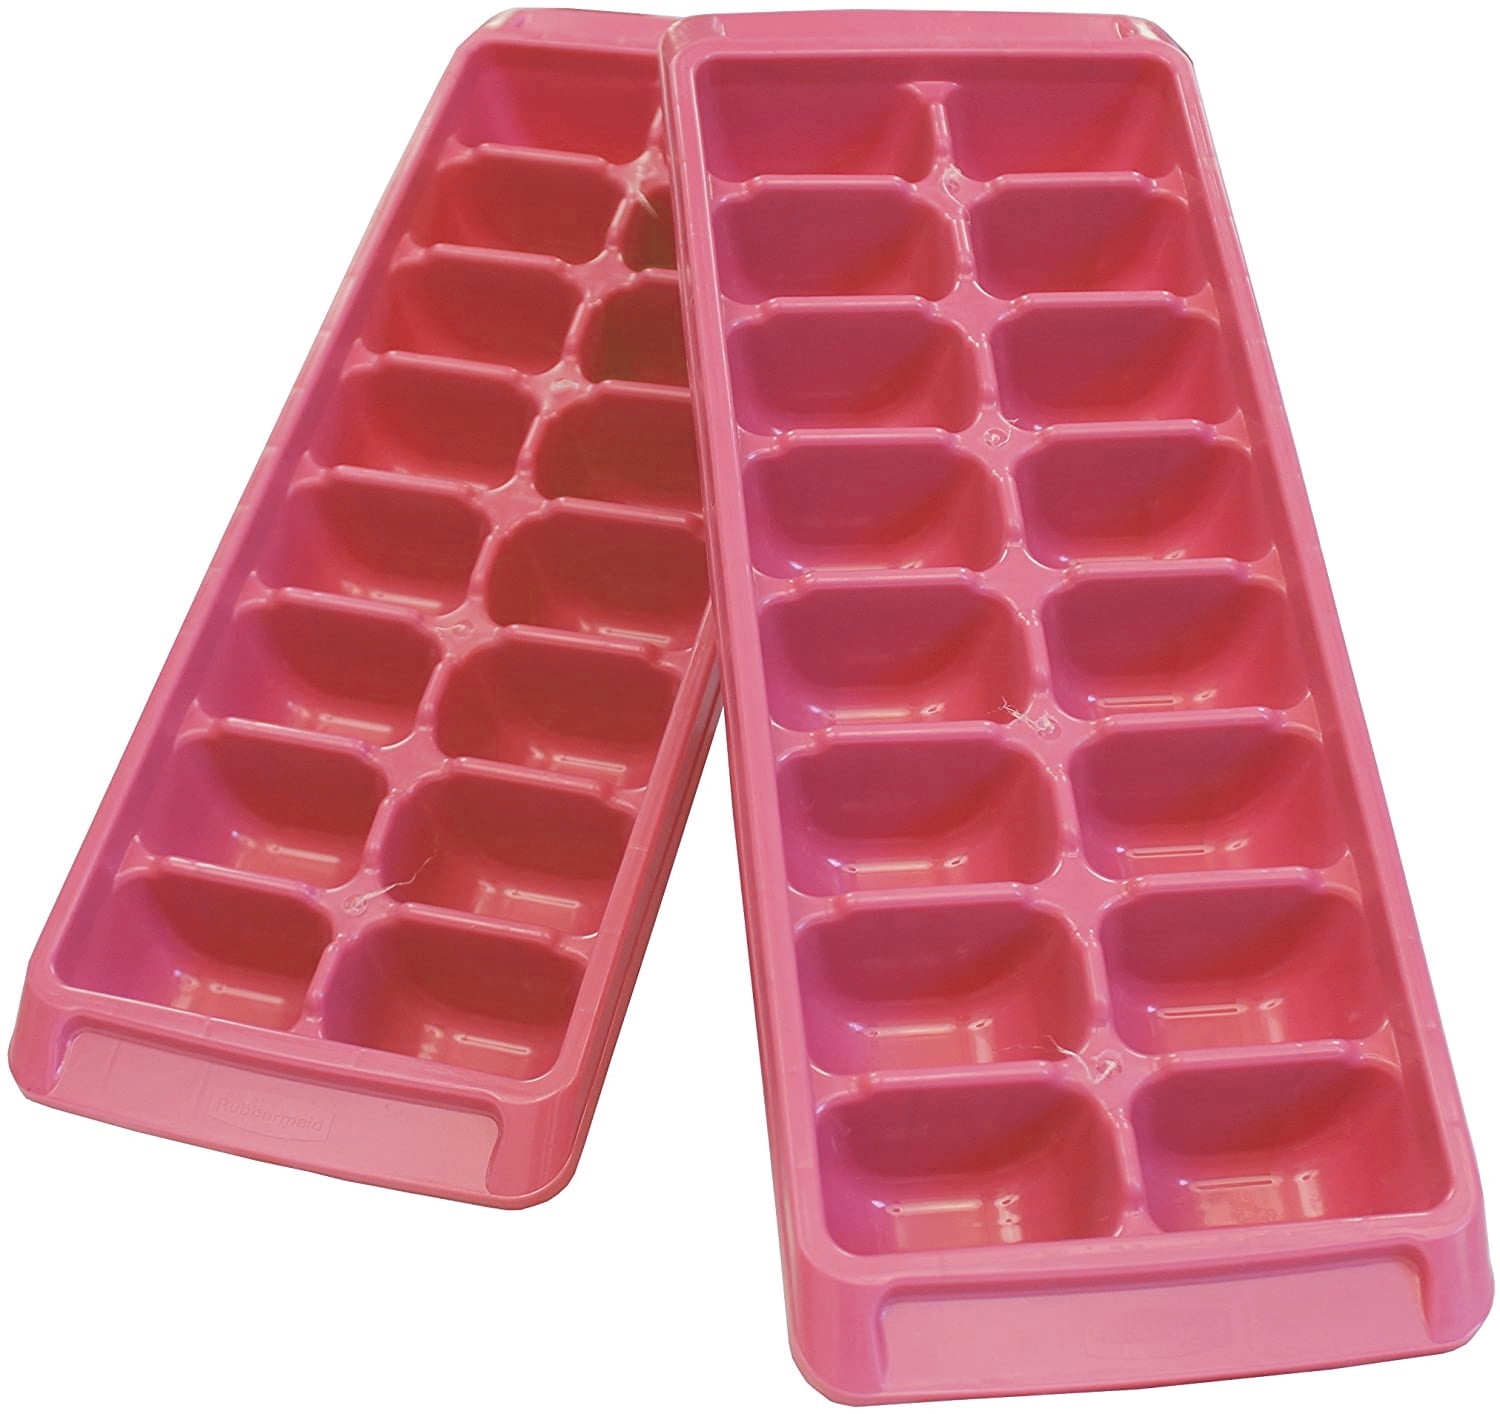 PACK OF 24 RUBBERMAID WHITE EASY RELEASE ICE CUBE TRAY 1998411 NEW 